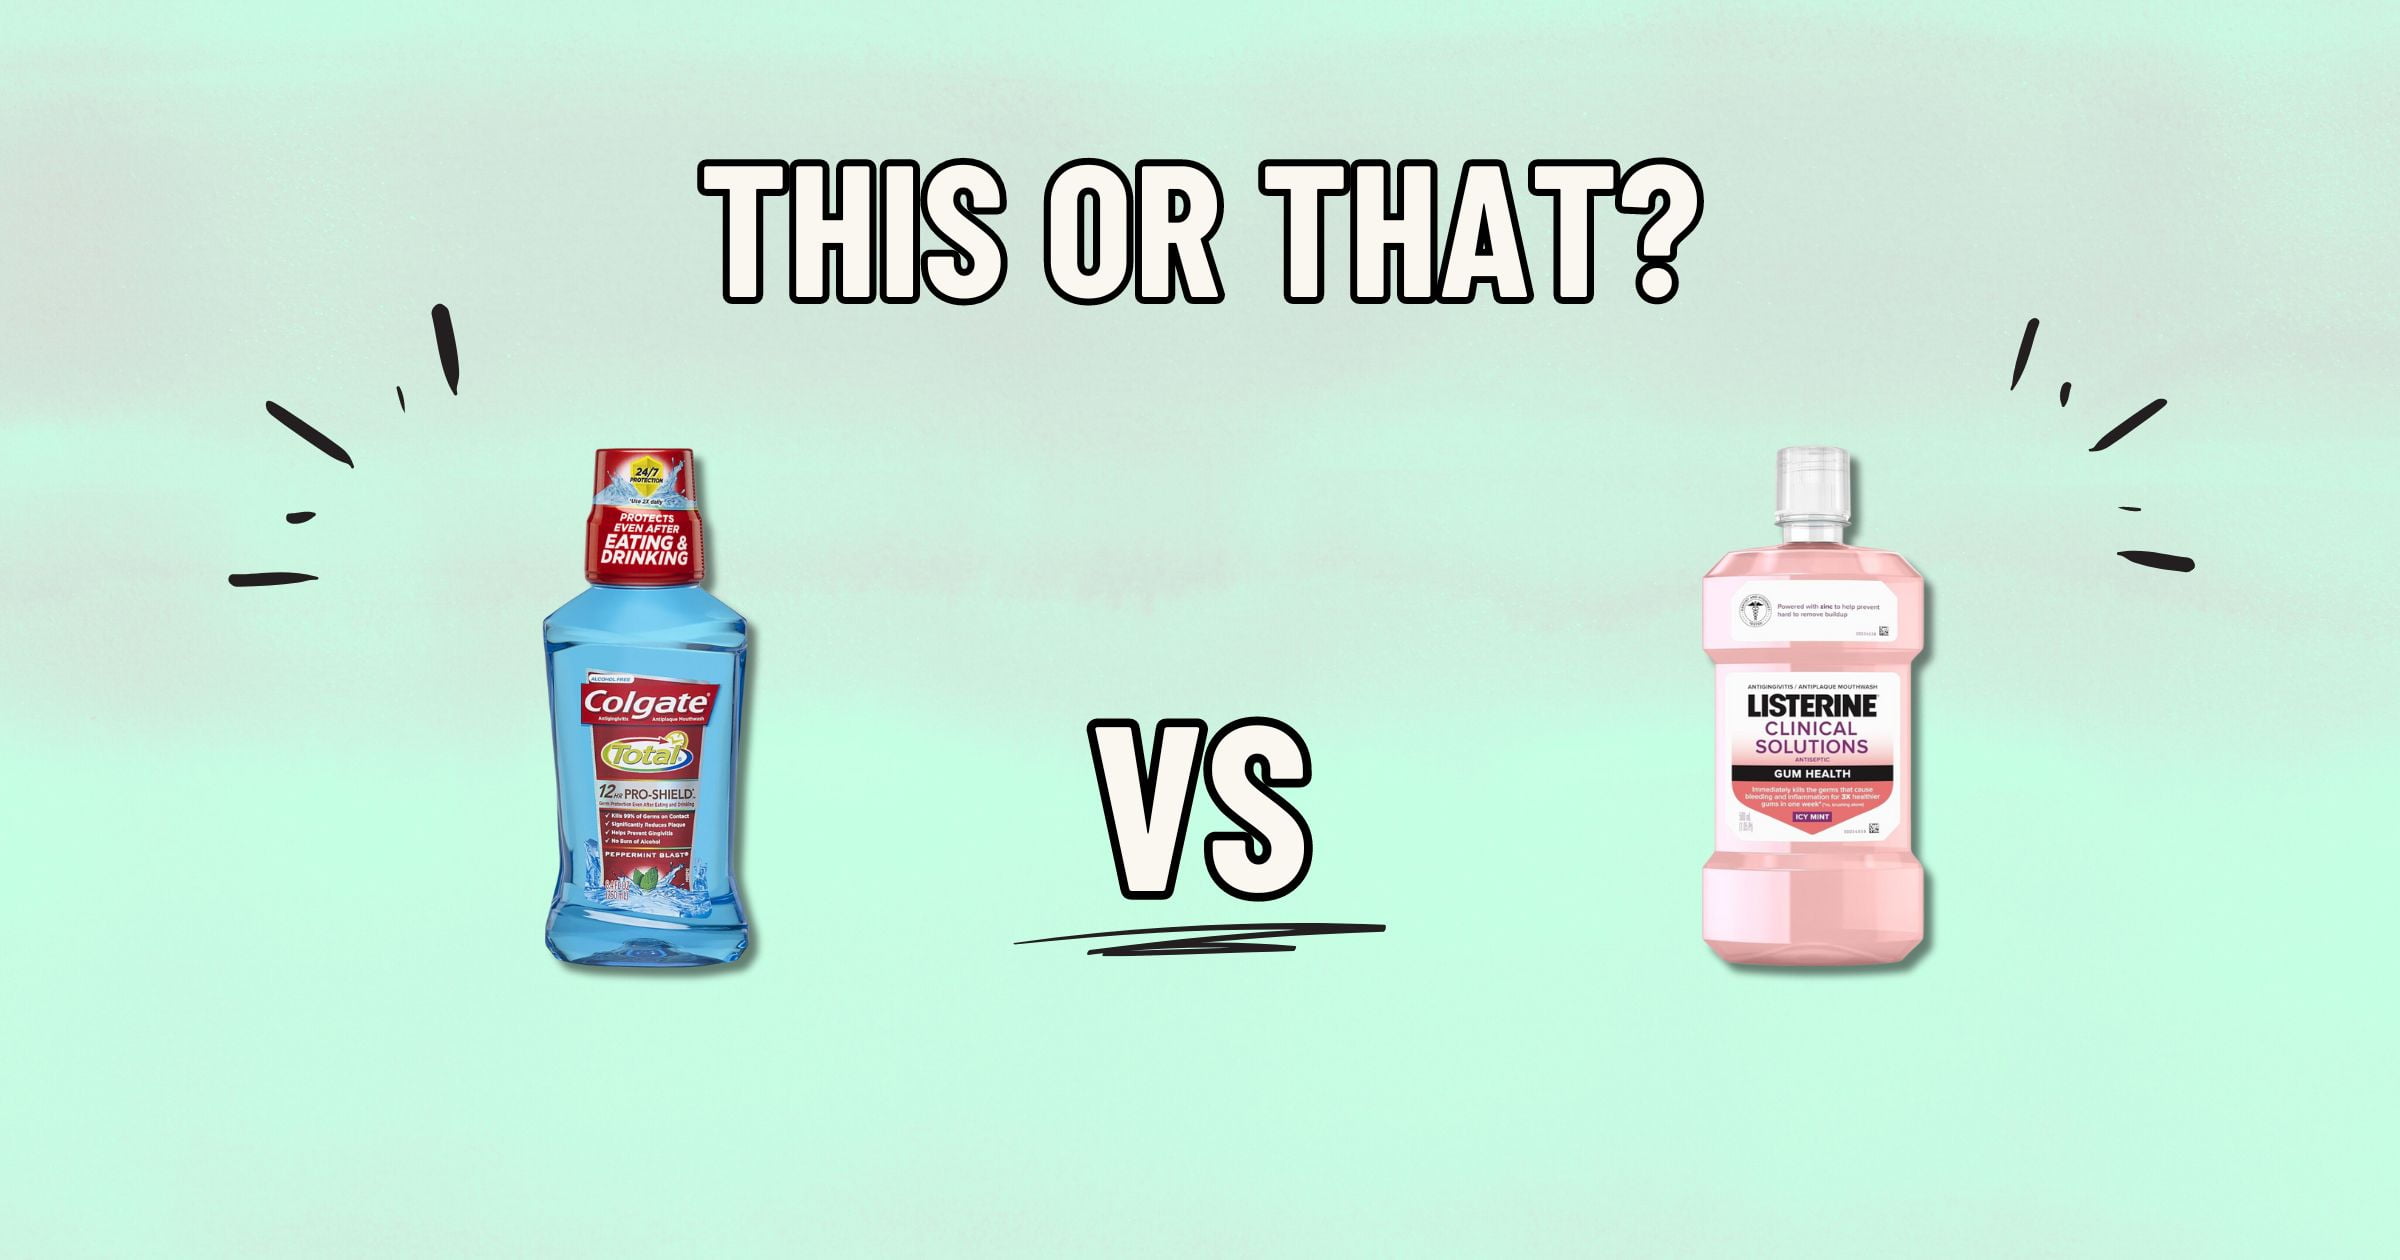 An image showing a comparison between two mouthwashes. On the left is a bottle of Colgate Total Advanced Pro-Shield non-alcohol mouthwash. On the right is a bottle of Listerine Total Care alcohol mouthwash. The text above reads "This or That?" and the text in the middle reads "VS".